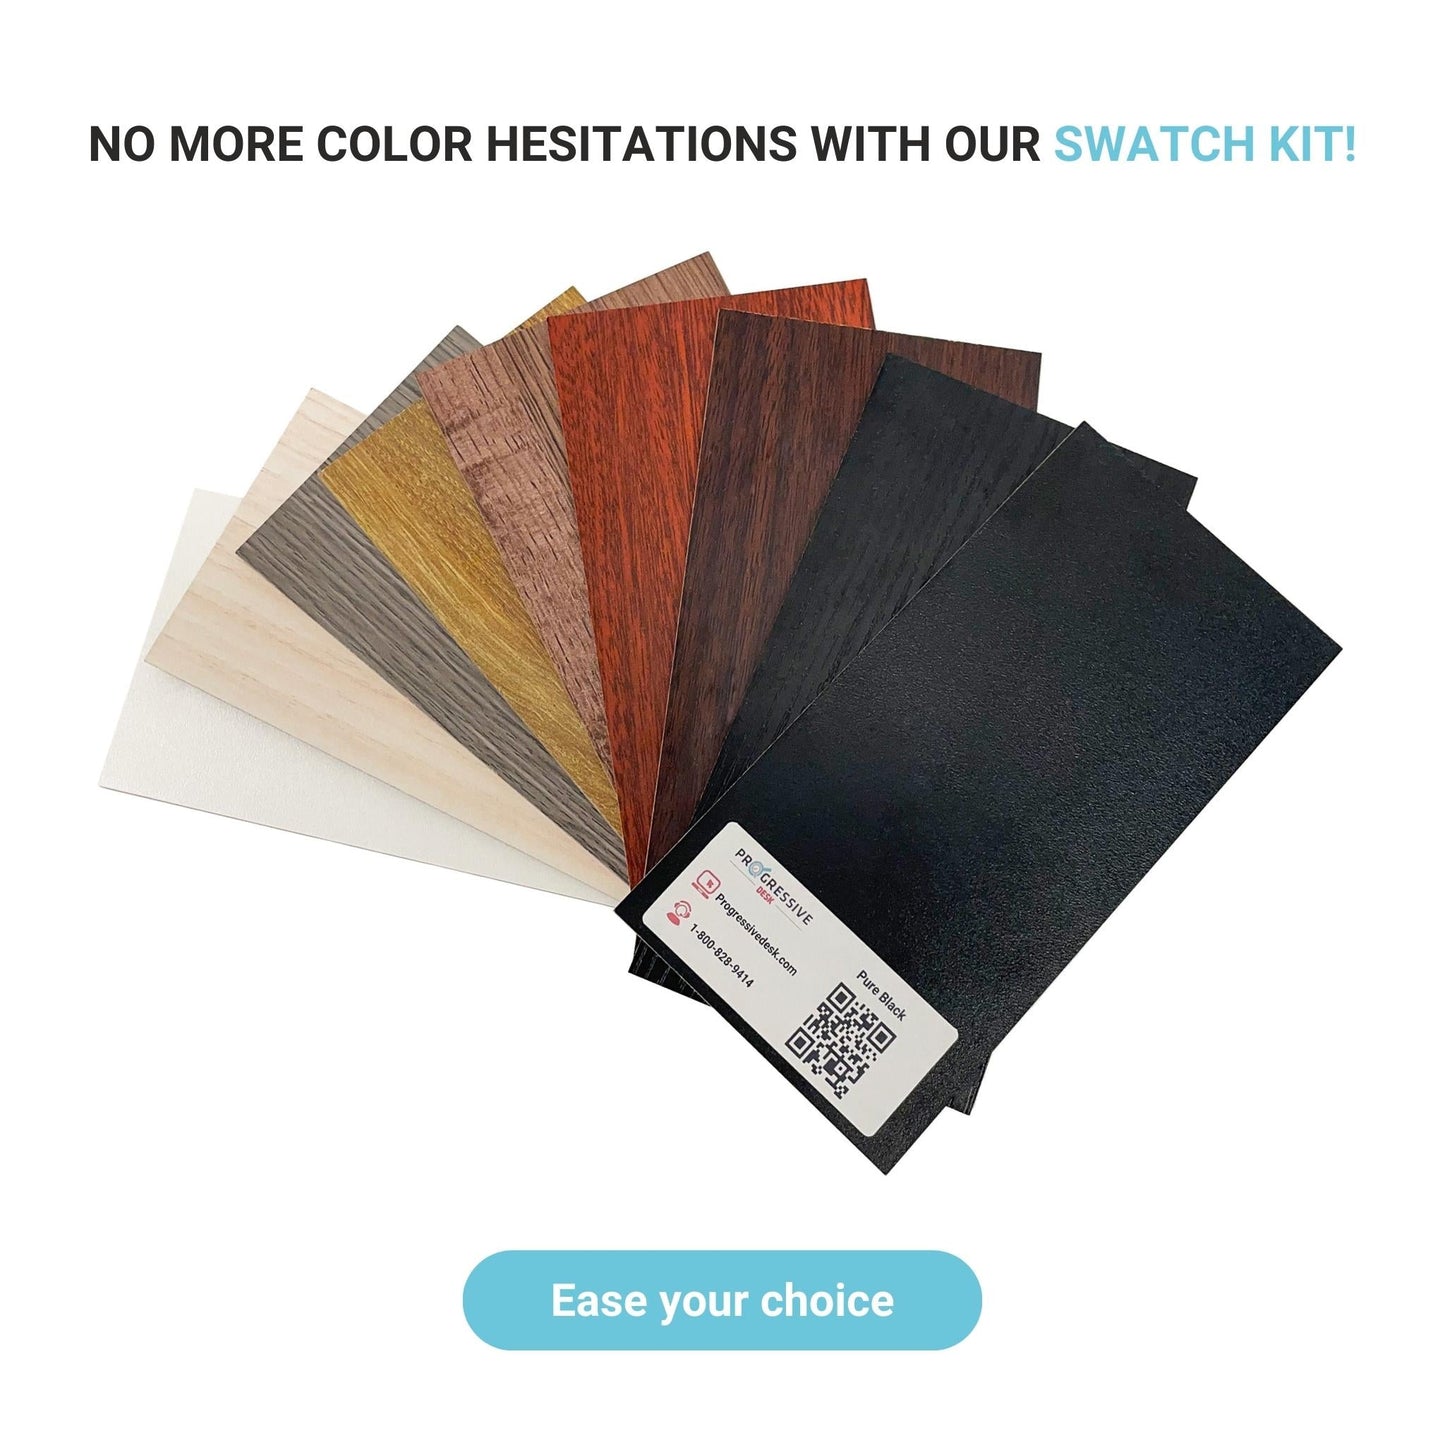 Swatch kit link:https://www.progressivedesk.ca/products/color-swatch-kit